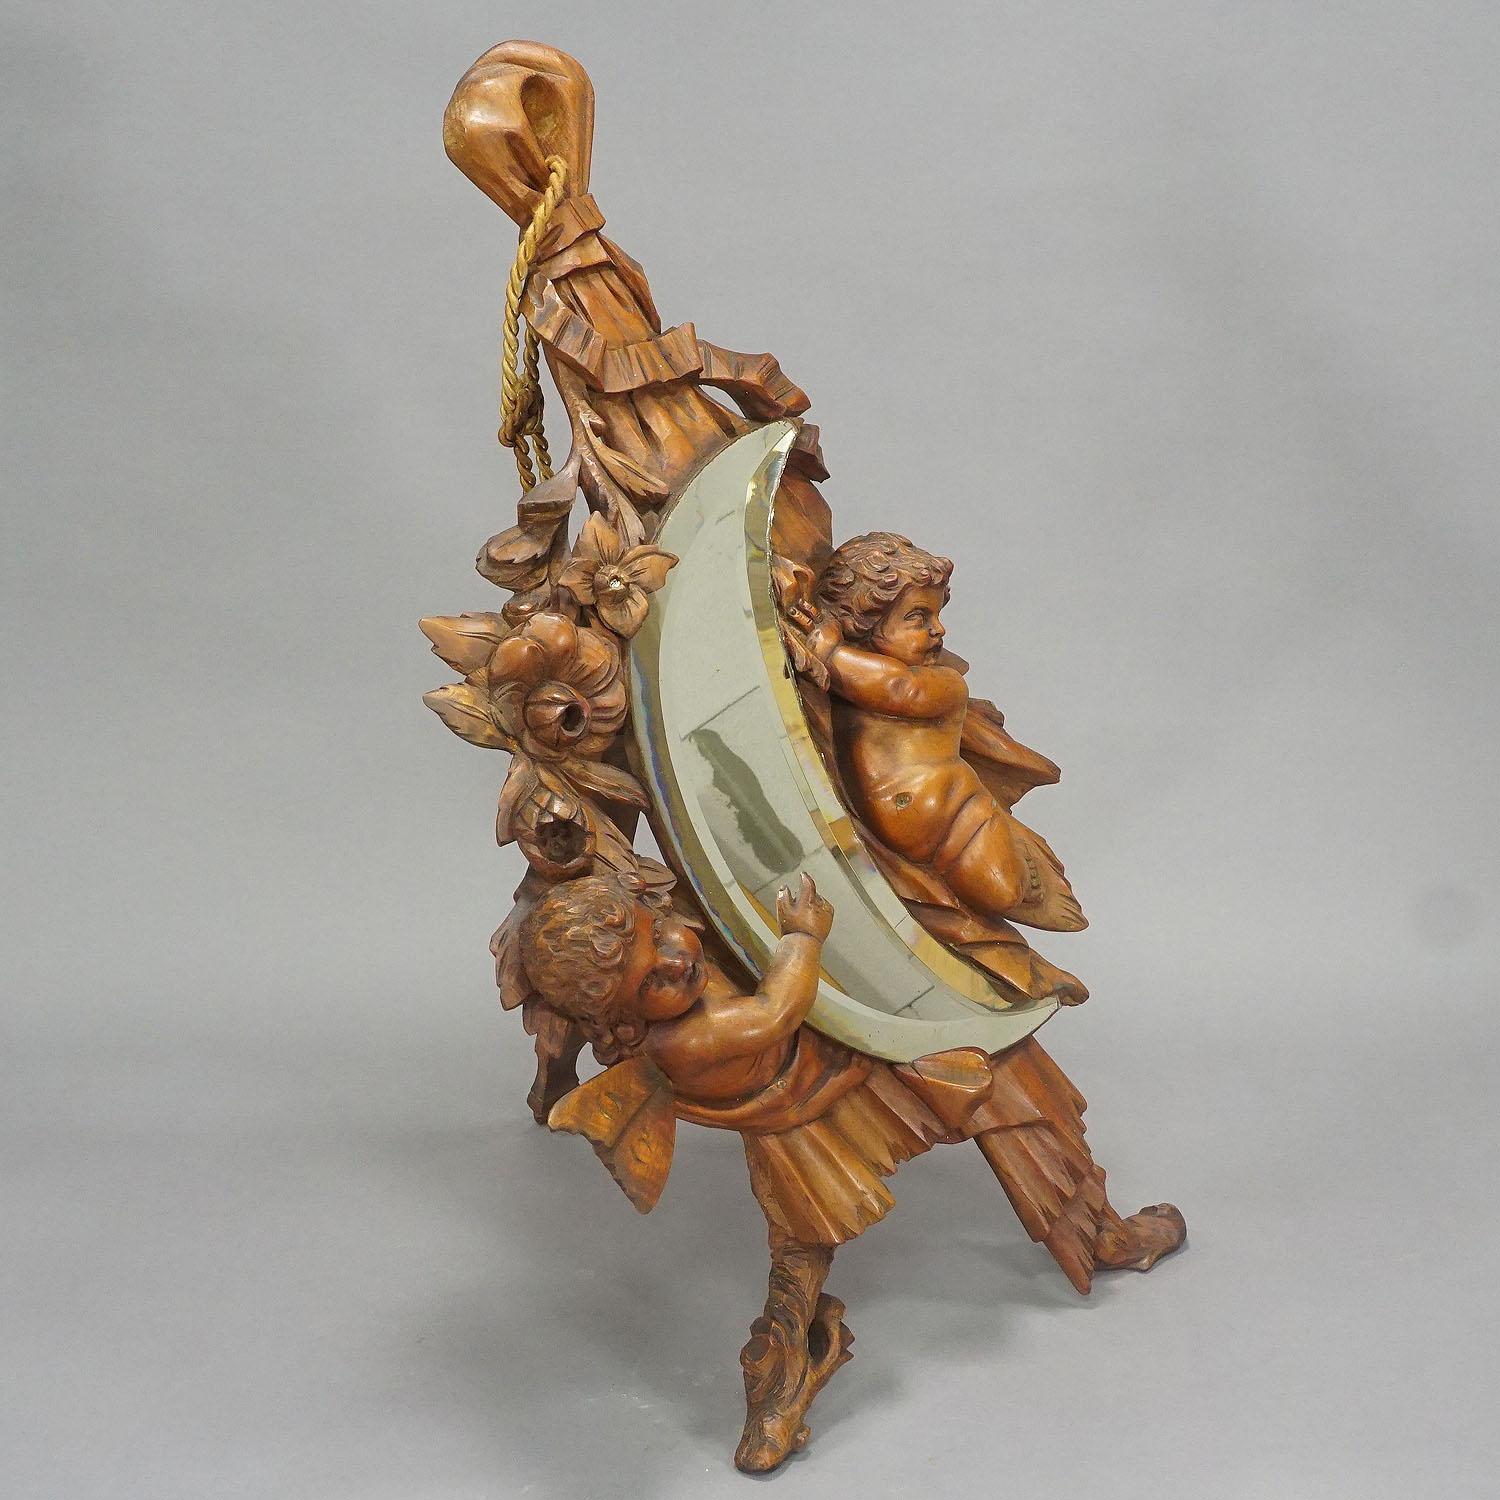 A wooden vanity mirror decorated with elaborate carved cherubs and flowers. Handcarved in Italy or France around 1900. With original antique mirror in good condition. Can be used hanging on the wall or as cheval mirror.

Measures: Width: 12.99